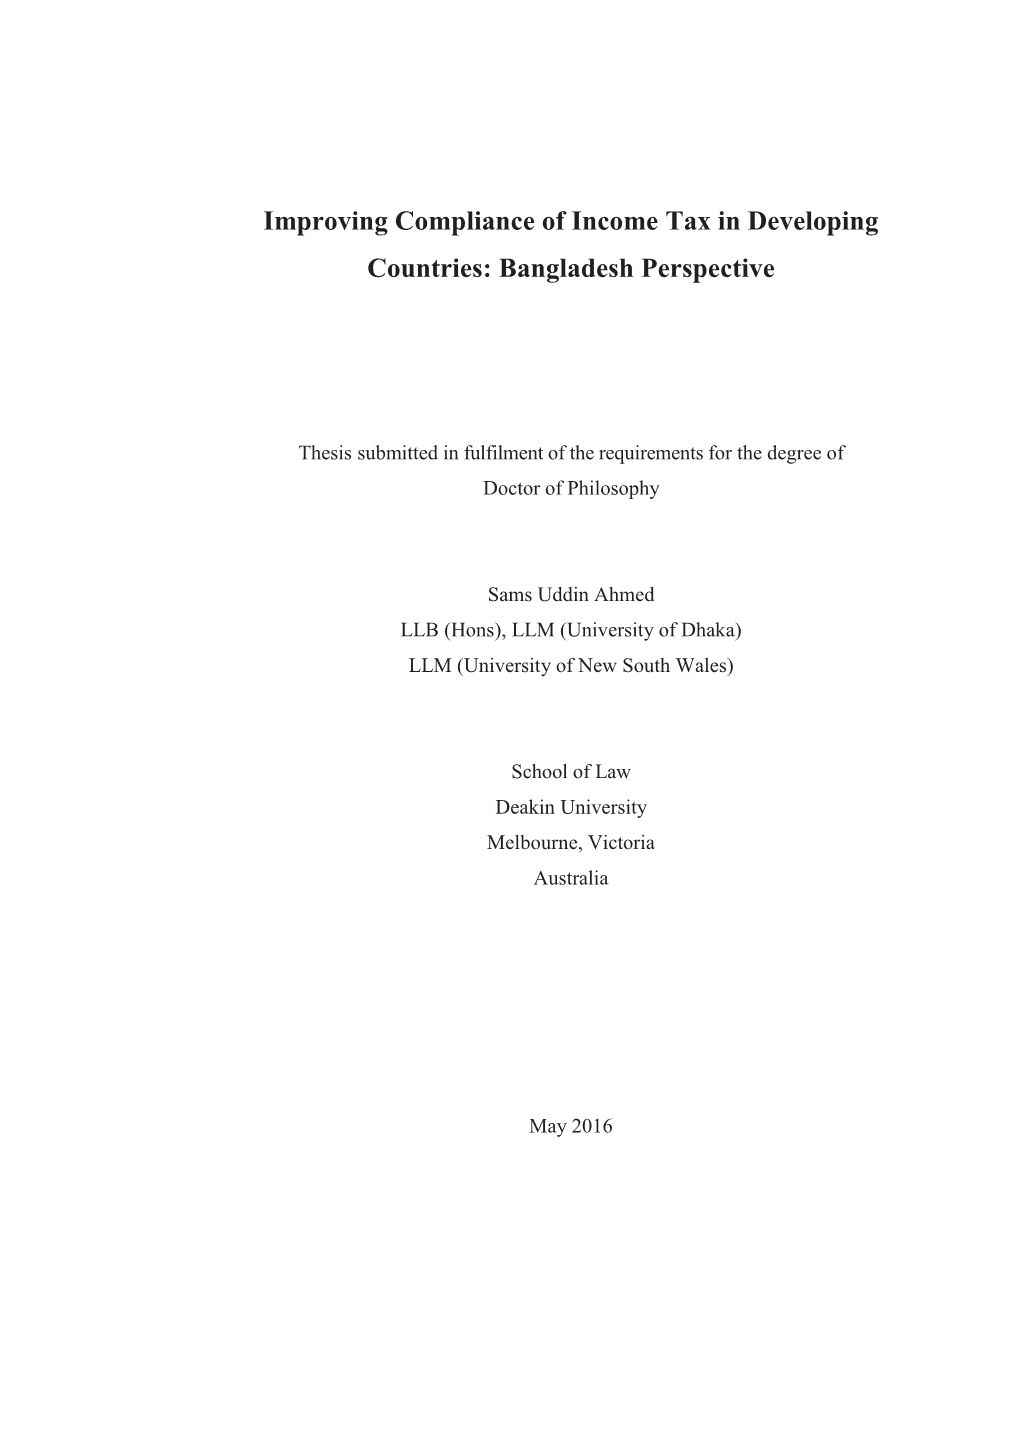 Improving Compliance of Income Tax in Developing Countries: Bangladesh Perspective